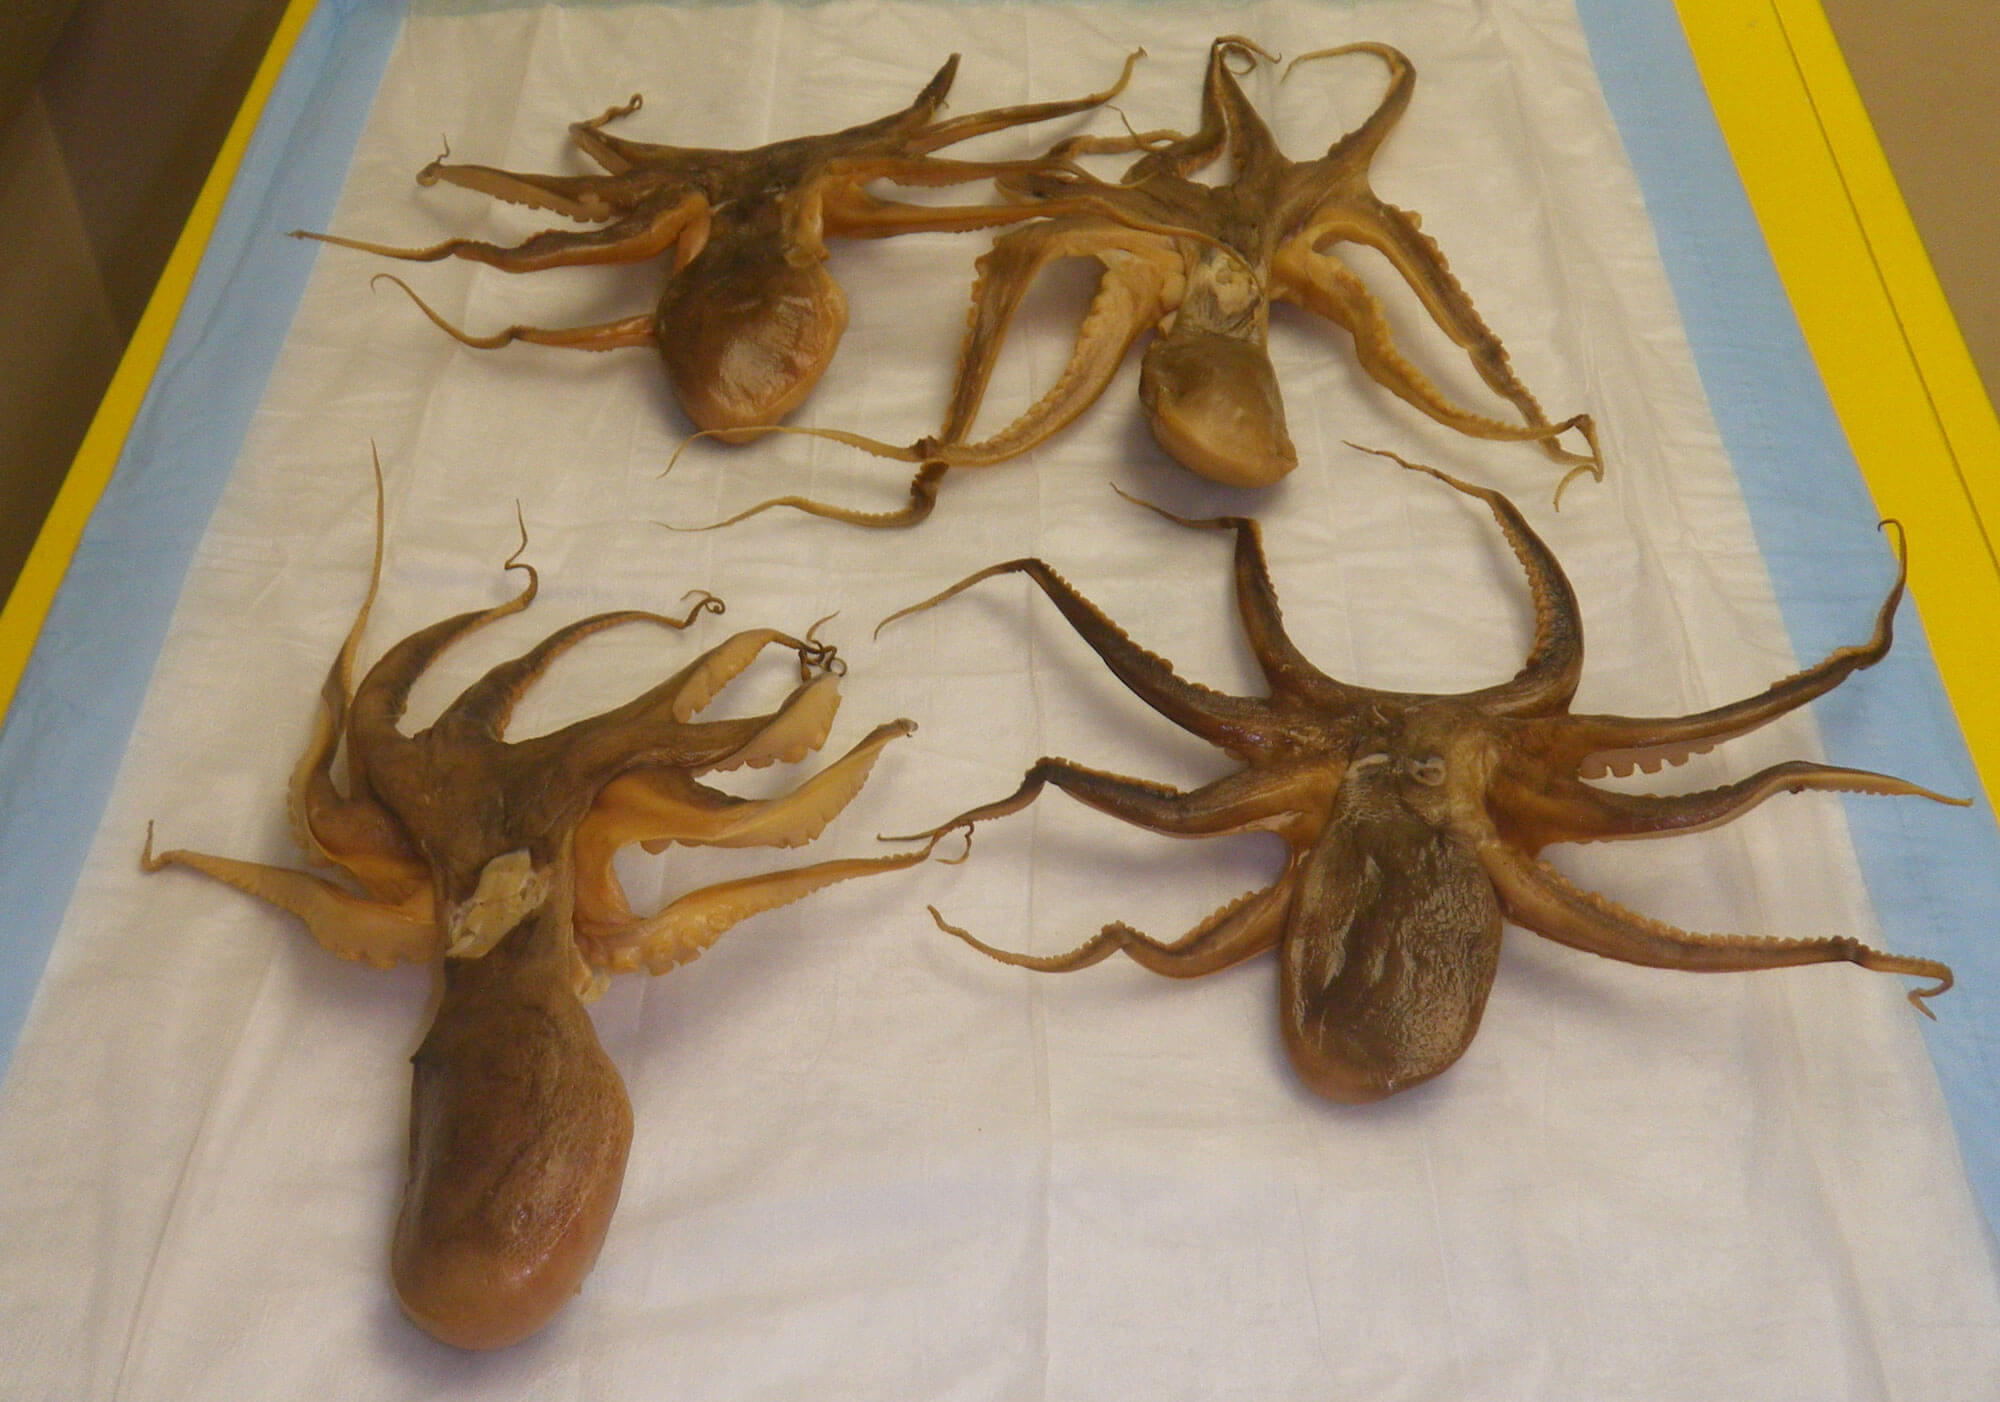 A photo of plastinated octopuses.